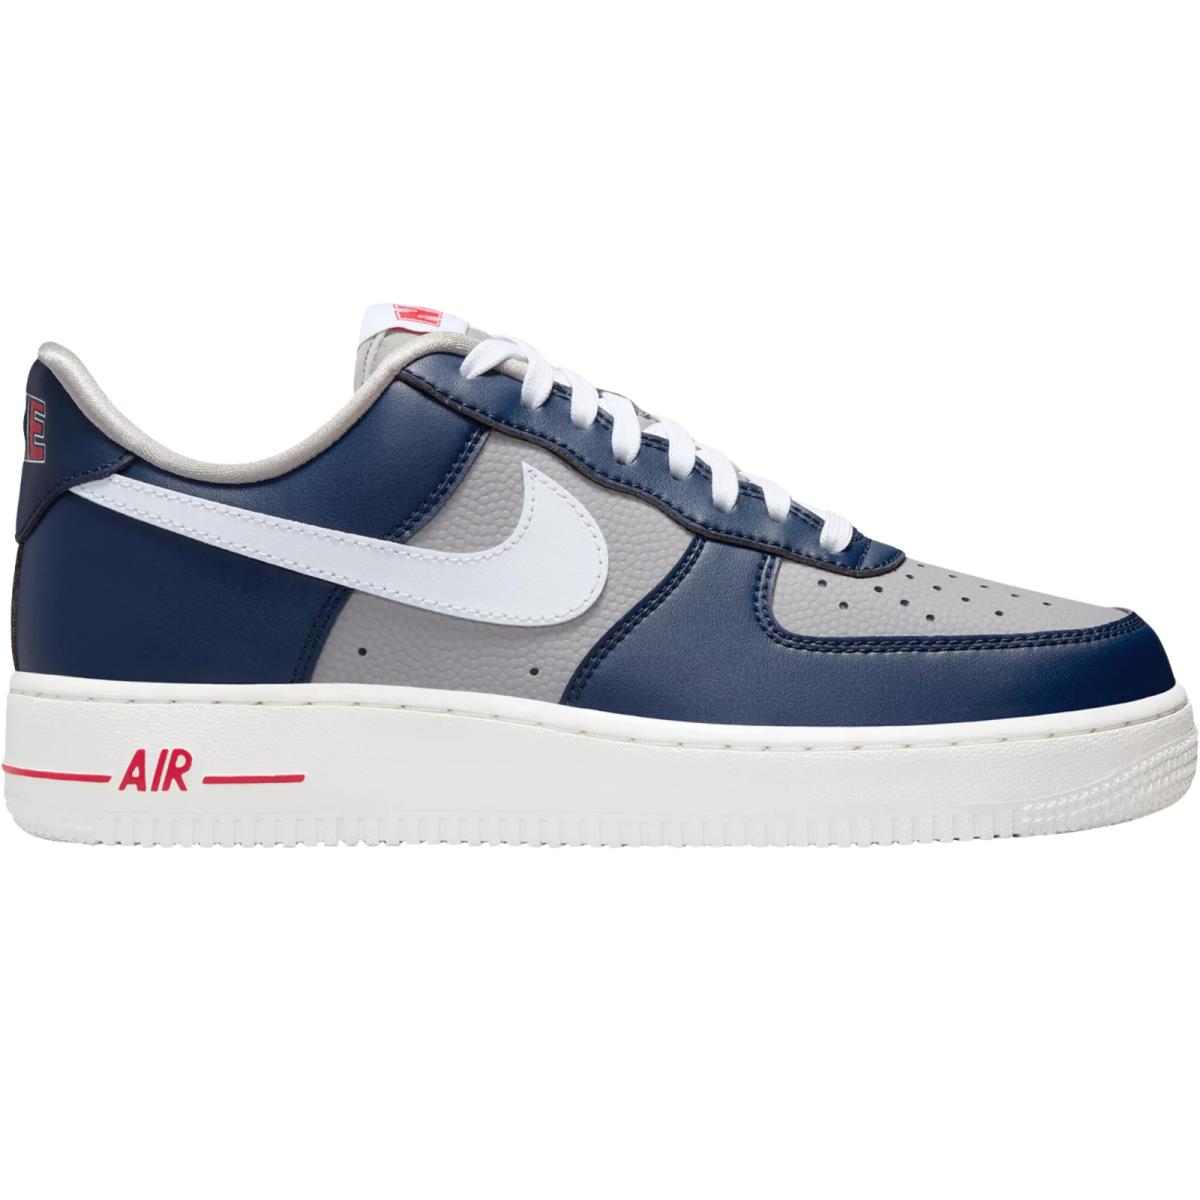 Nike Air Force 1 Women`s Casual Shoes All Colors US Sizes 6-11 College Navy/White/Pewter Grey/University Red